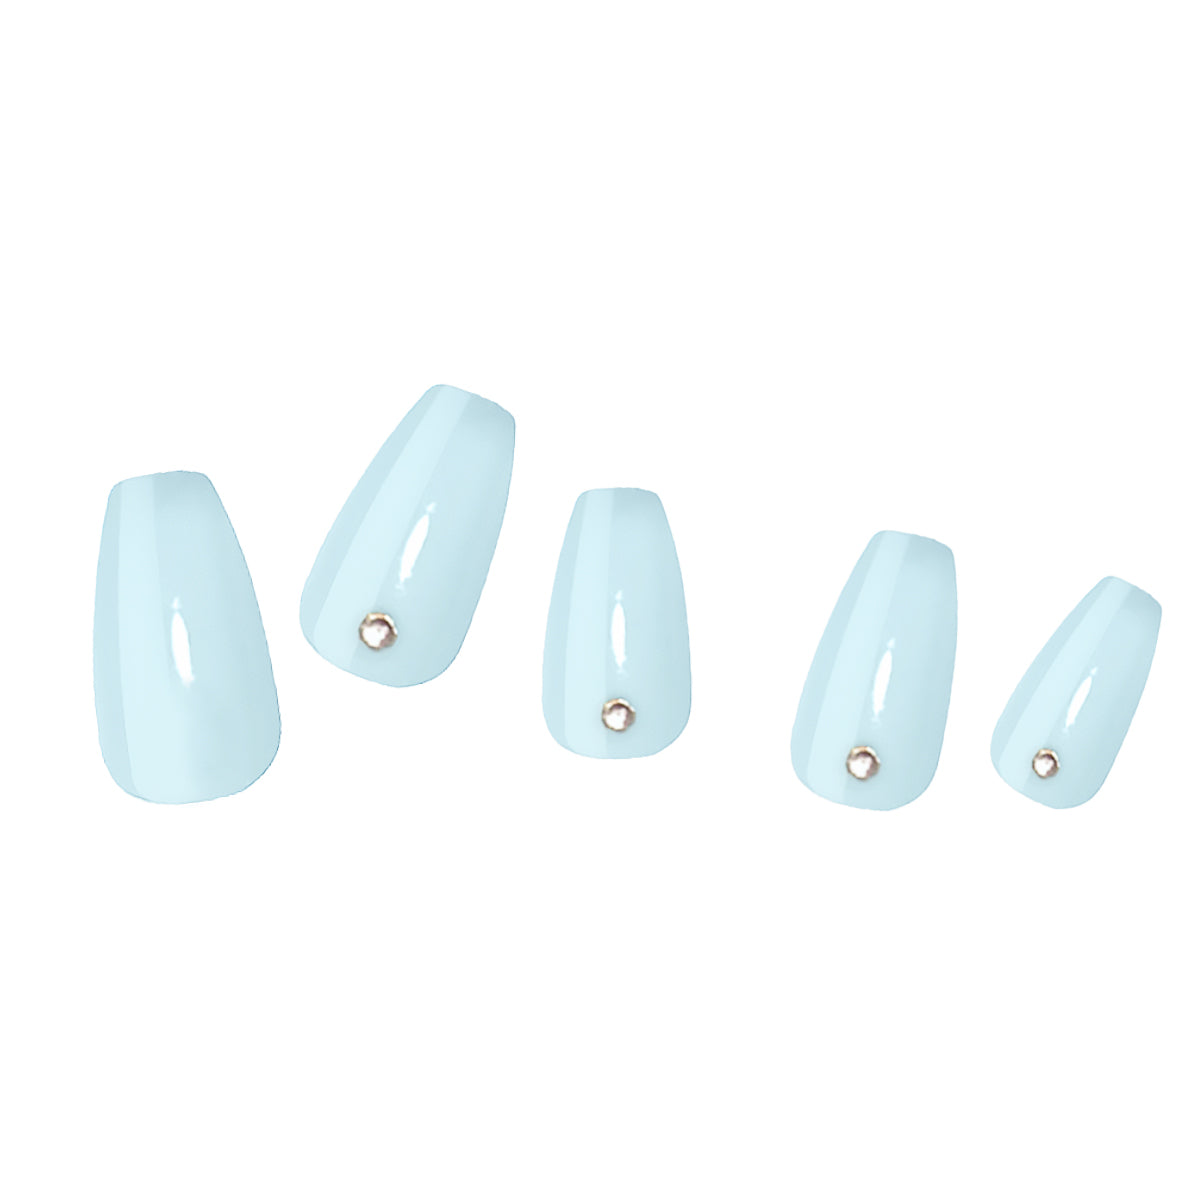 Blue Press On Nails with Glue - Coffin Shaped Nails by Poshmellow